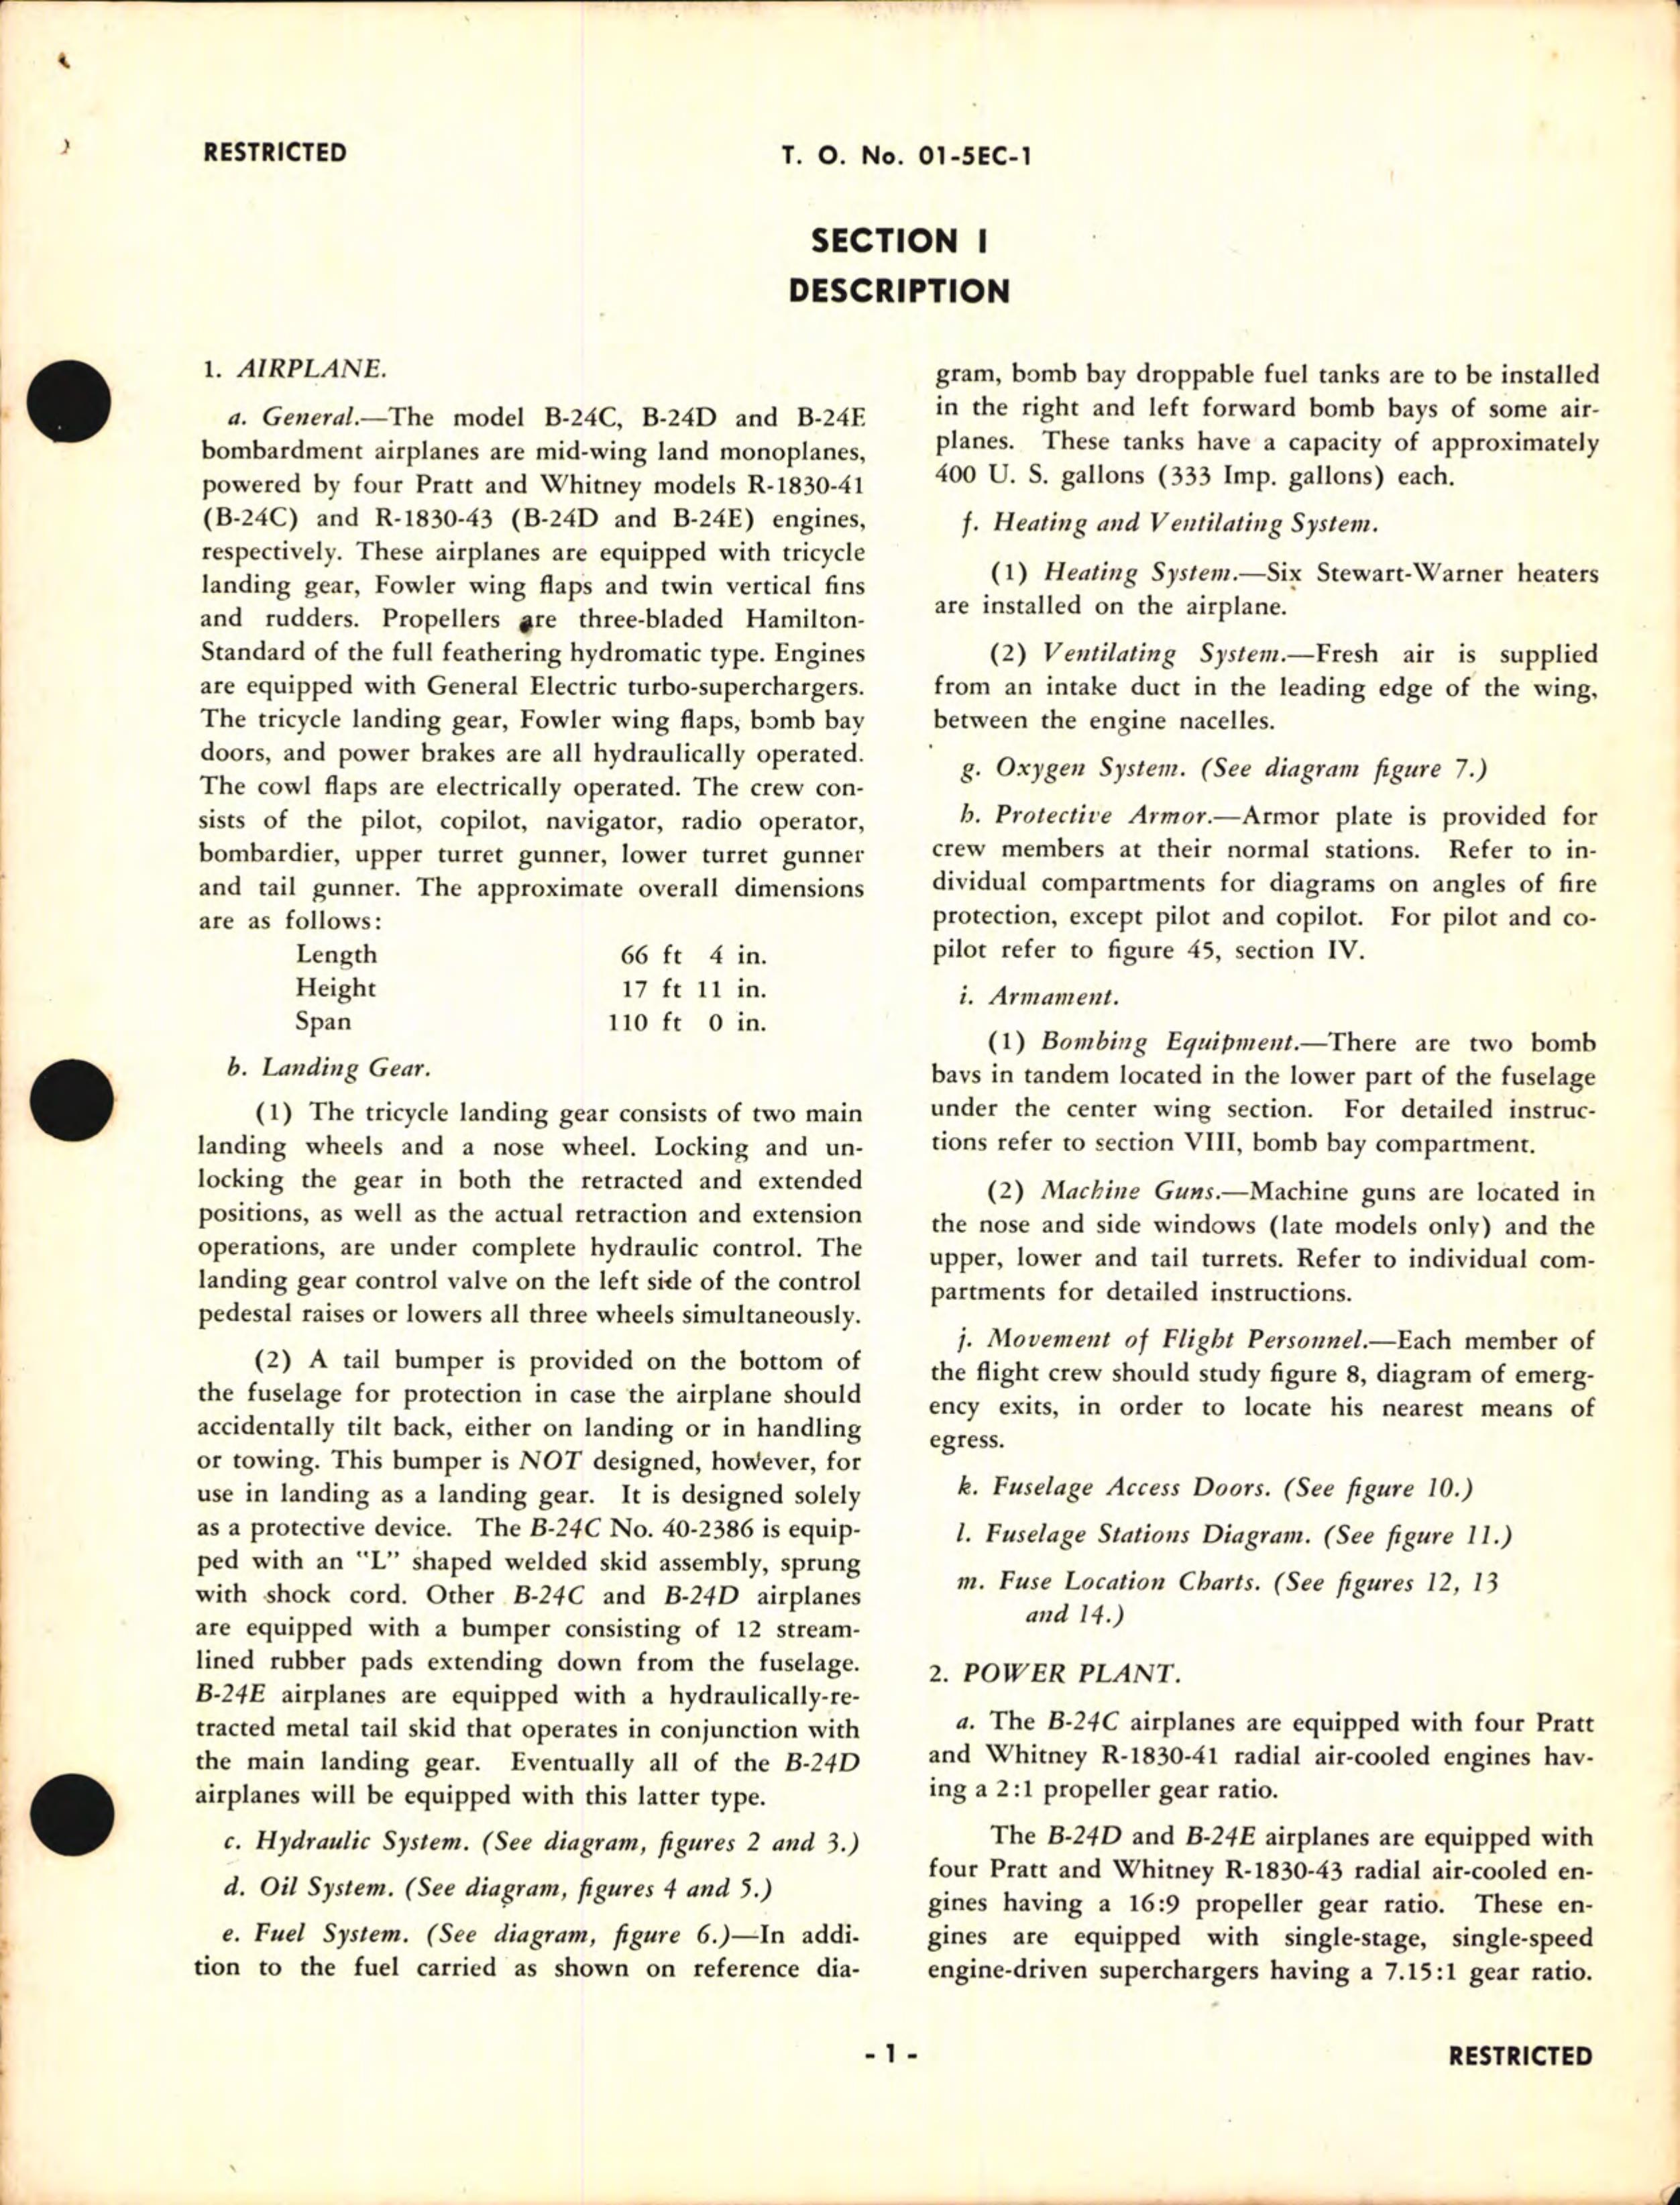 Sample page 9 from AirCorps Library document: Pilot's Handbook of Flight Operating Instructions for the B-24C, D, and E